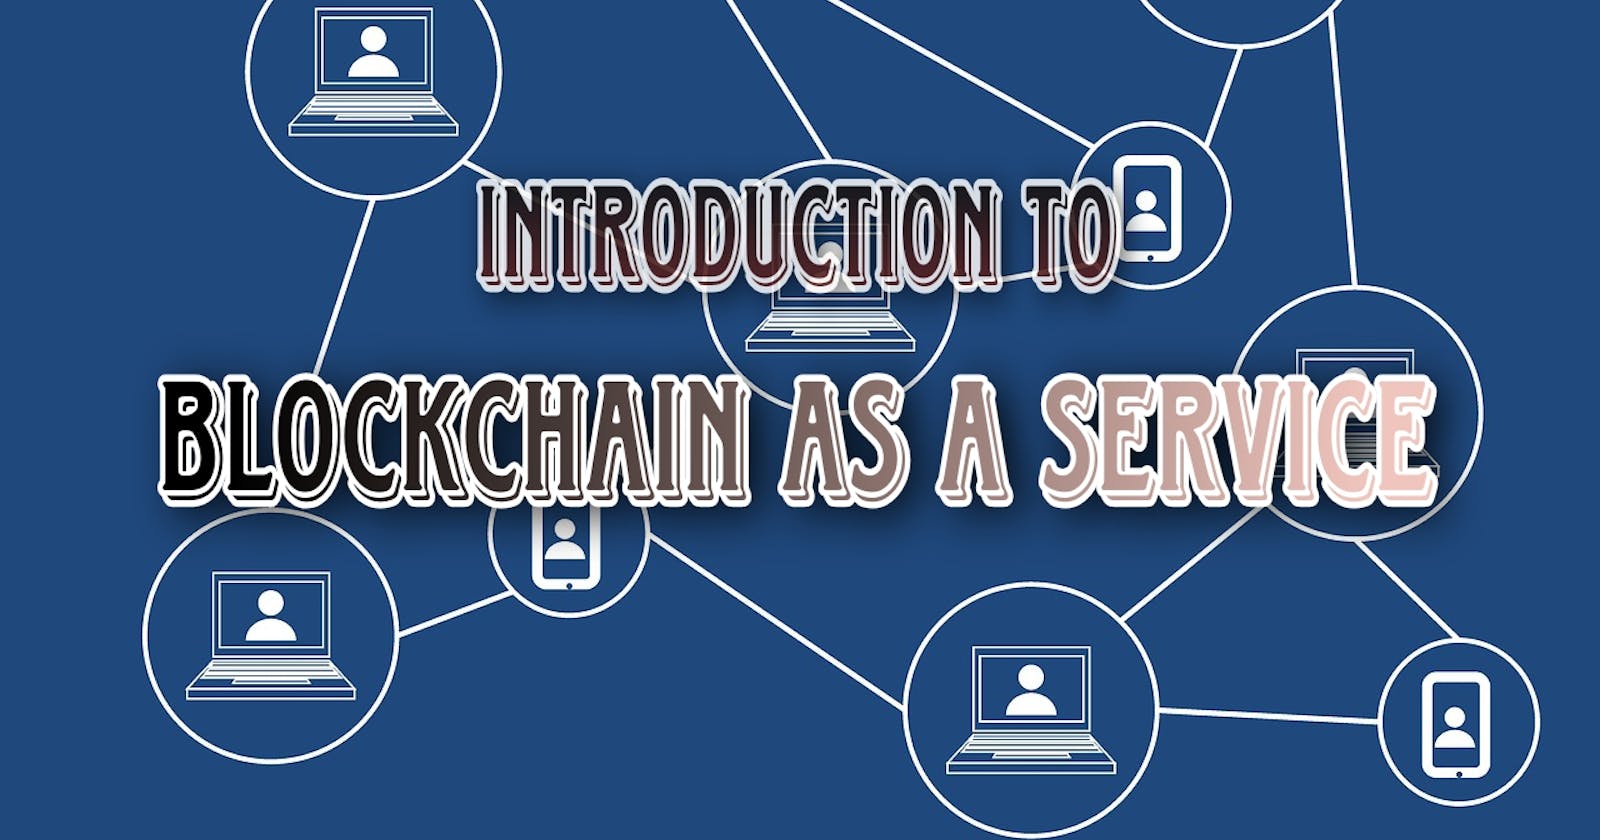 Introduction to Blockchain as a Service